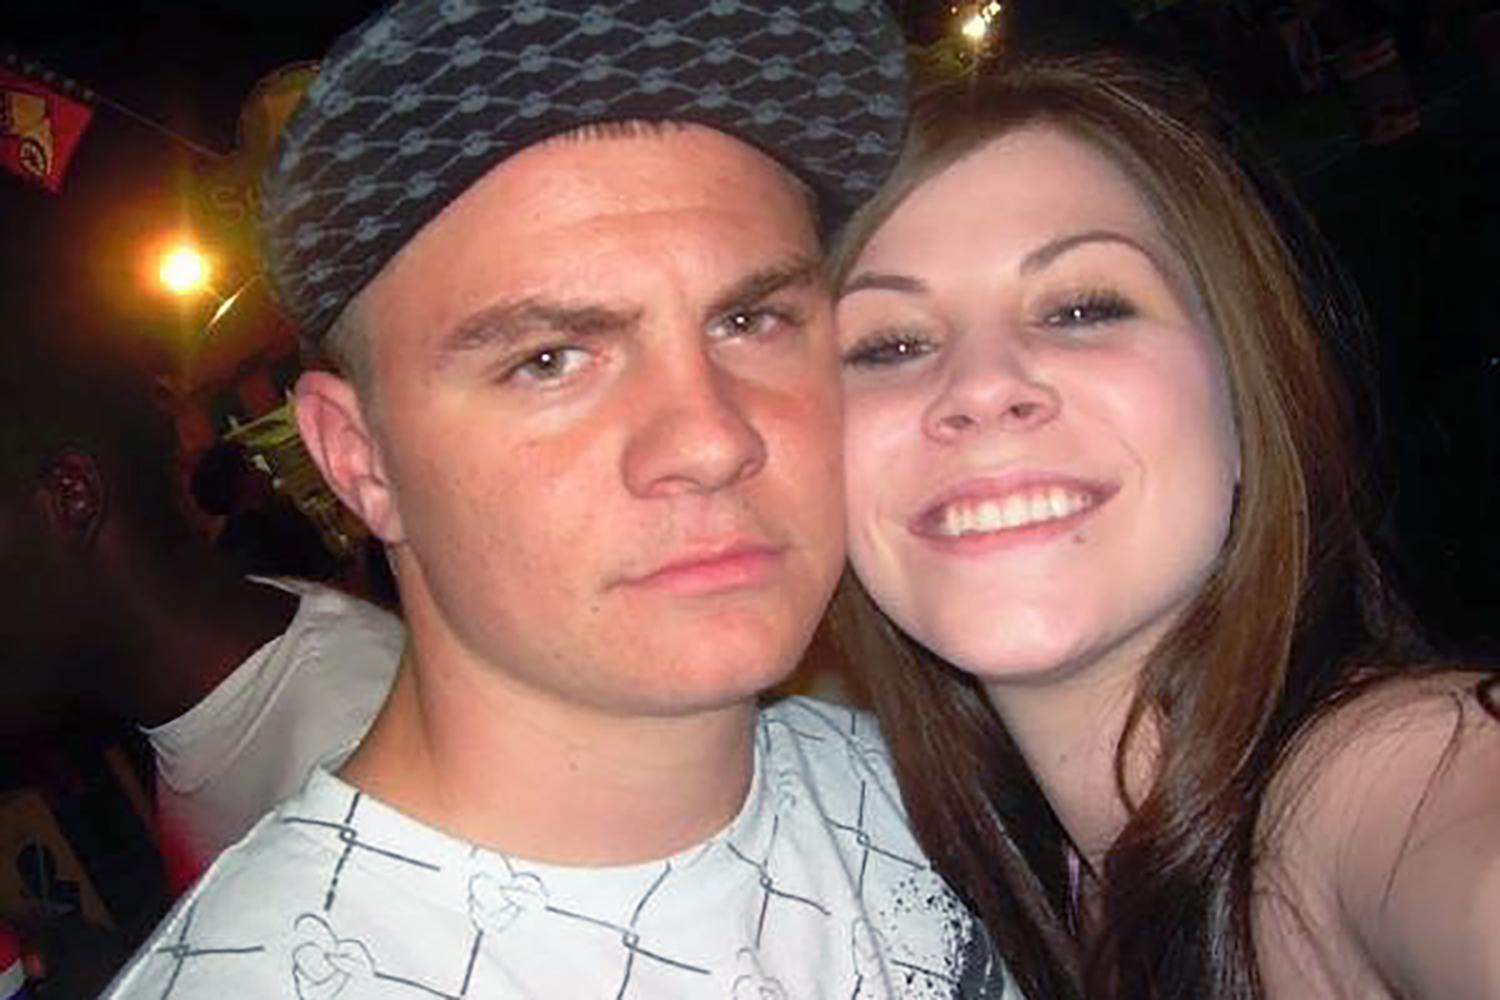 Breana Hamby and her brother, Chandler. Breana died of an overdose in March 2013 when she was 25. Three years later, Chandler also died of an overdose when he too was 25. Phoenix, Arizona, 2010.